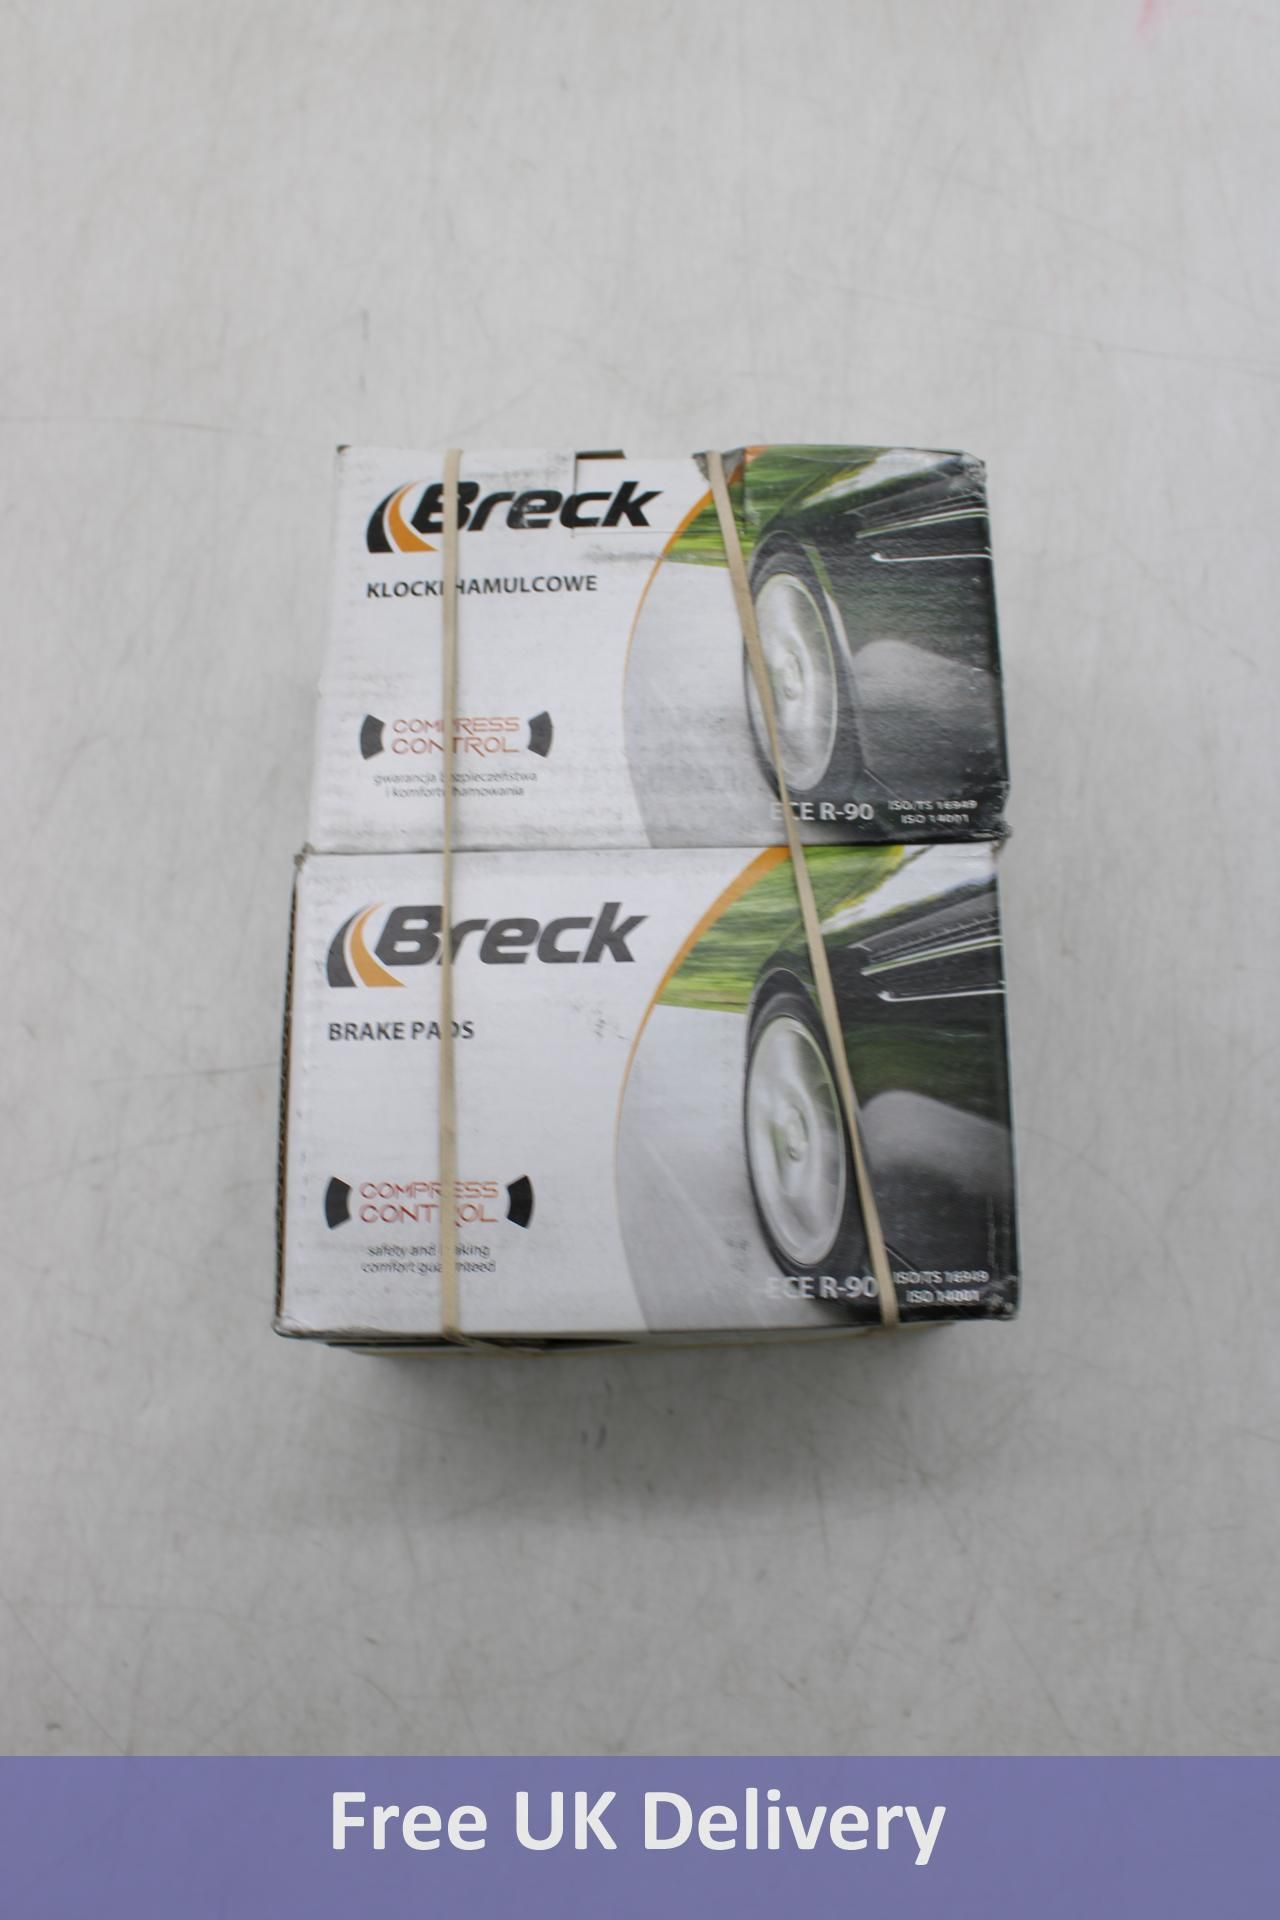 Two Breck ECE R-90 Sets Of Break Pads. Box damaged